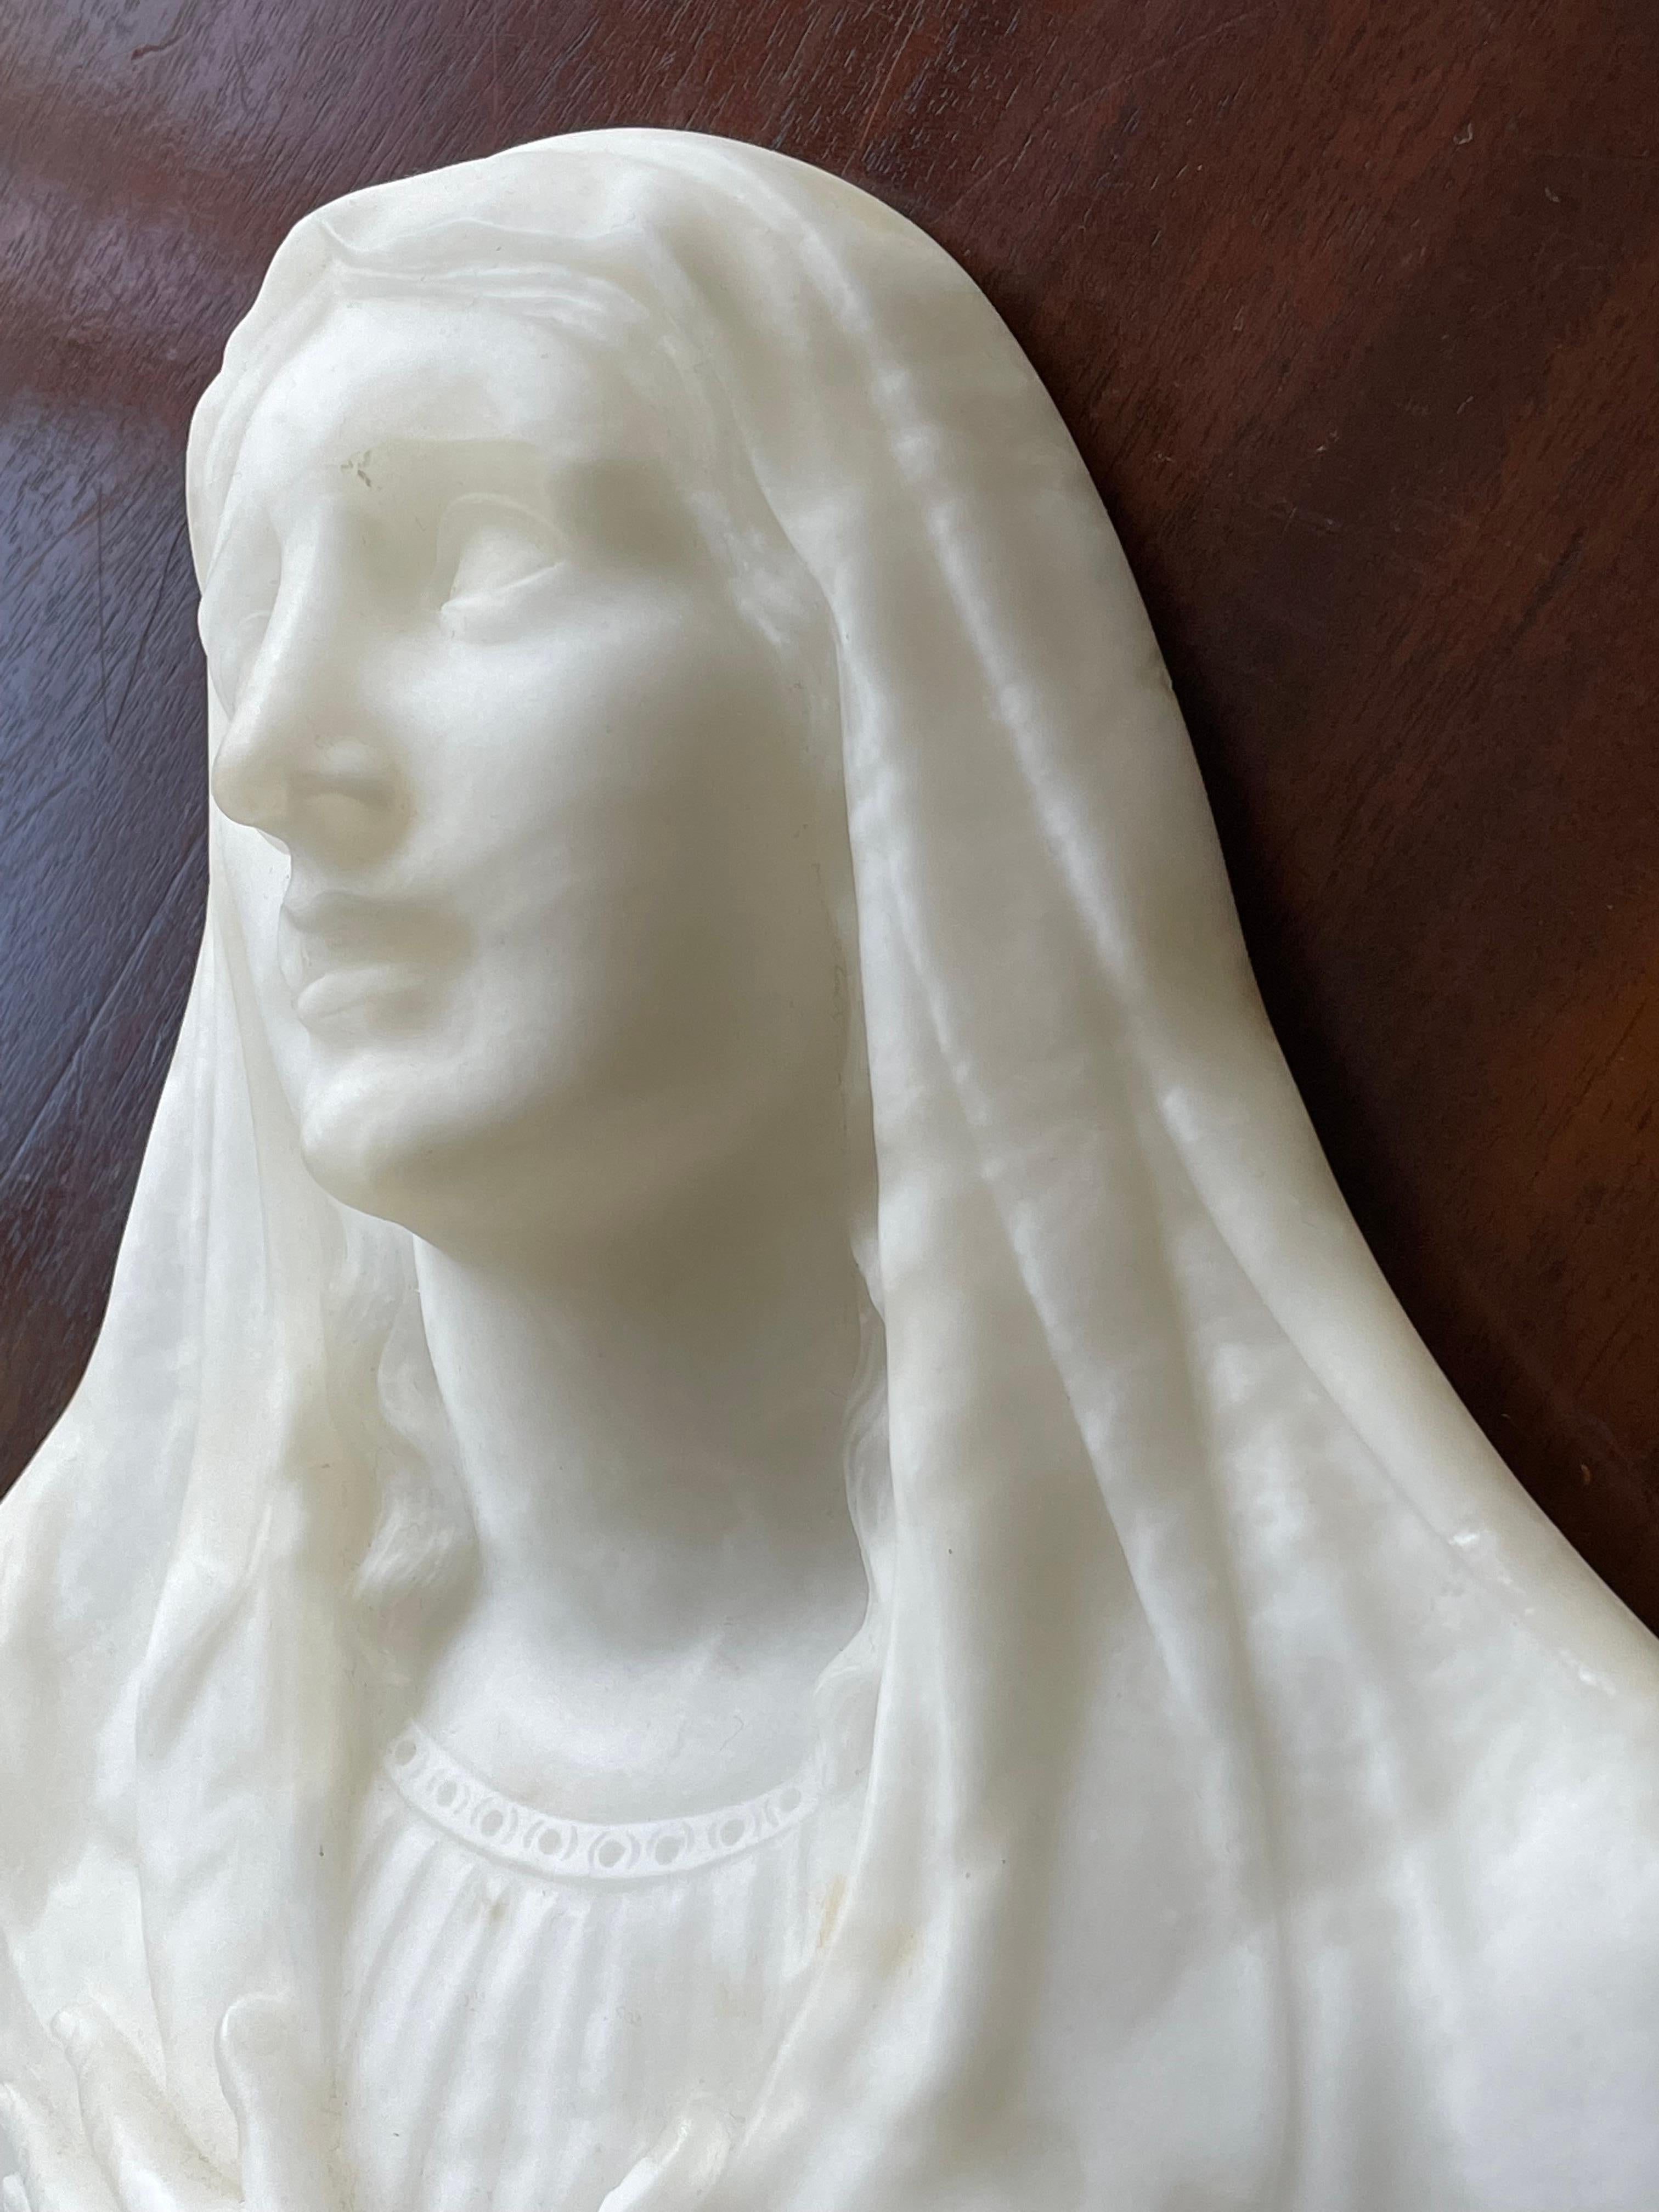 Hand-Carved Rare Hand Carved Early 1900s Alabaster Bust Sculpture of a Mourning Virgin Mary